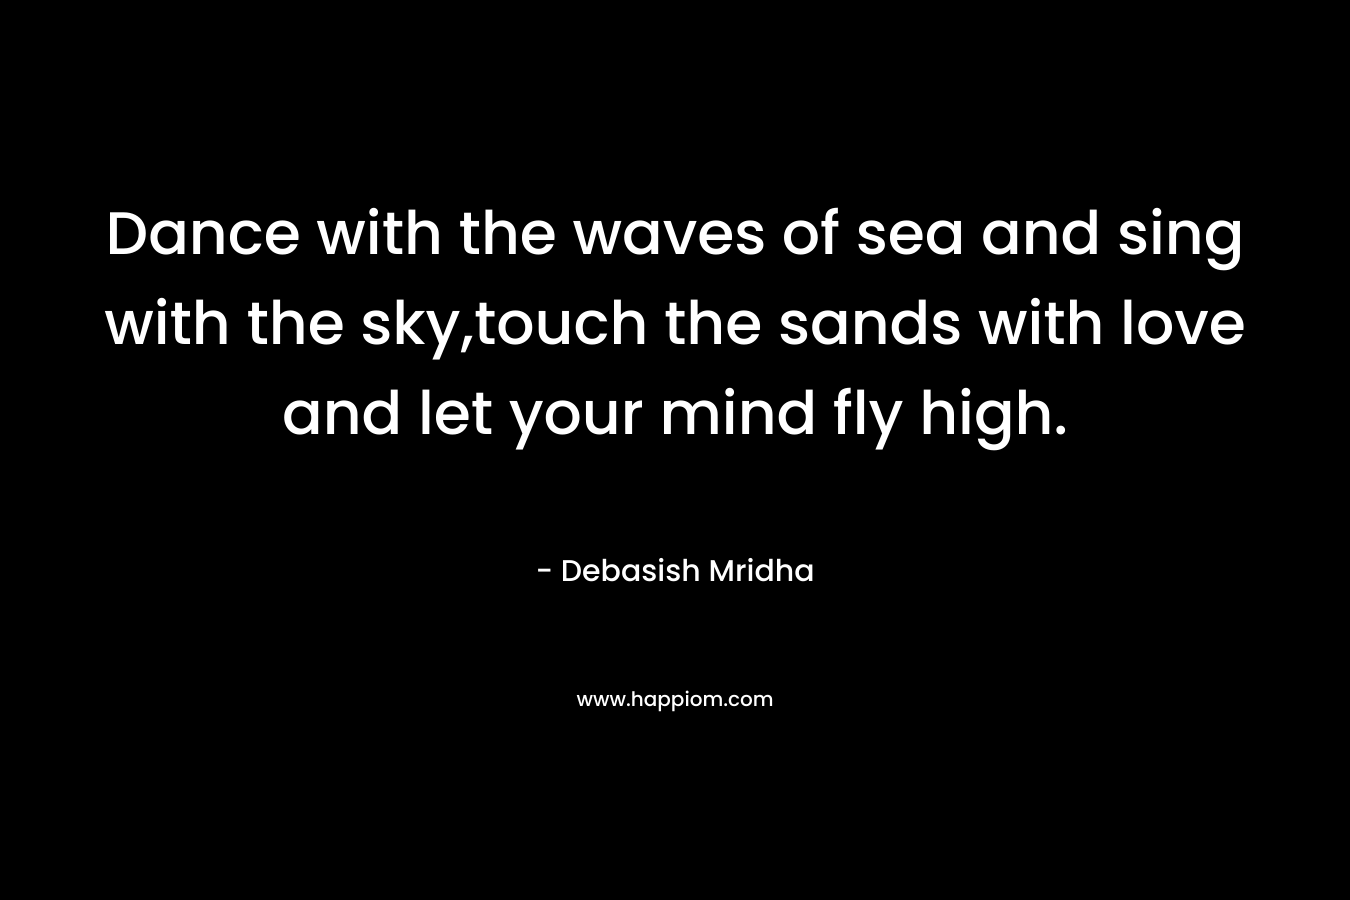 Dance with the waves of sea and sing with the sky,touch the sands with love and let your mind fly high. – Debasish Mridha